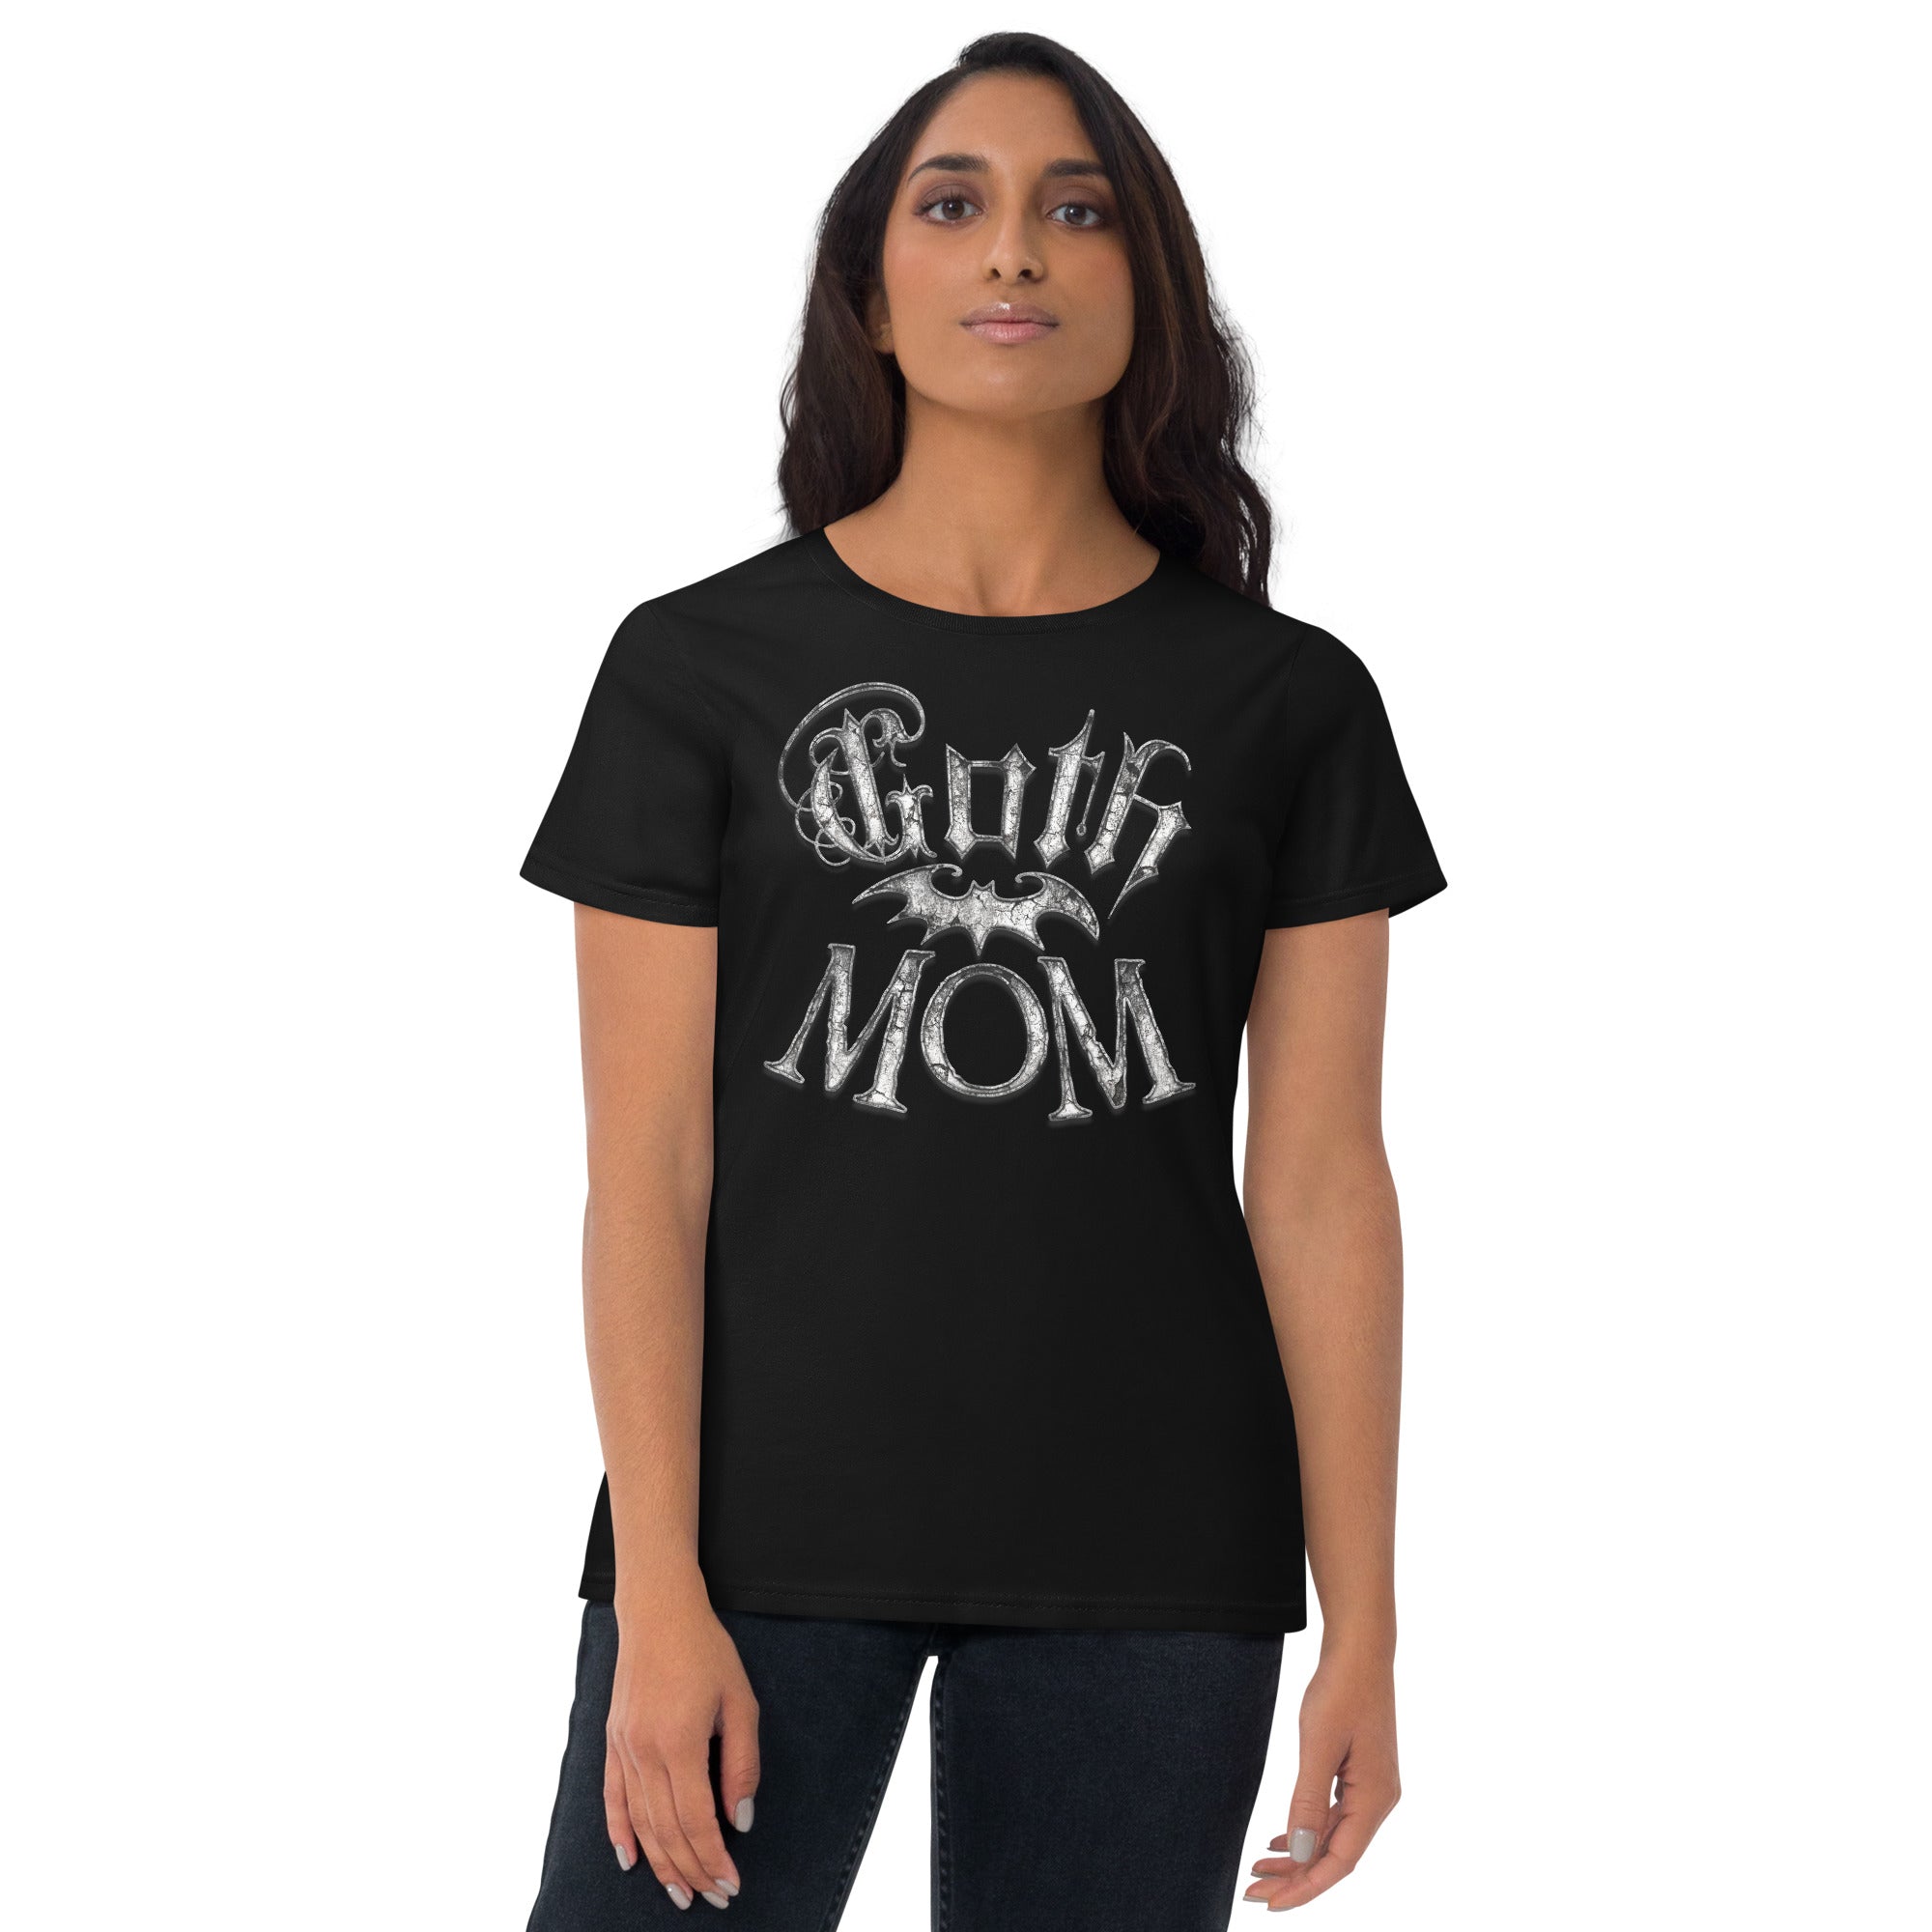 White Goth Mom with Bat Mother's Day Women's Short Sleeve Babydoll T-shirt